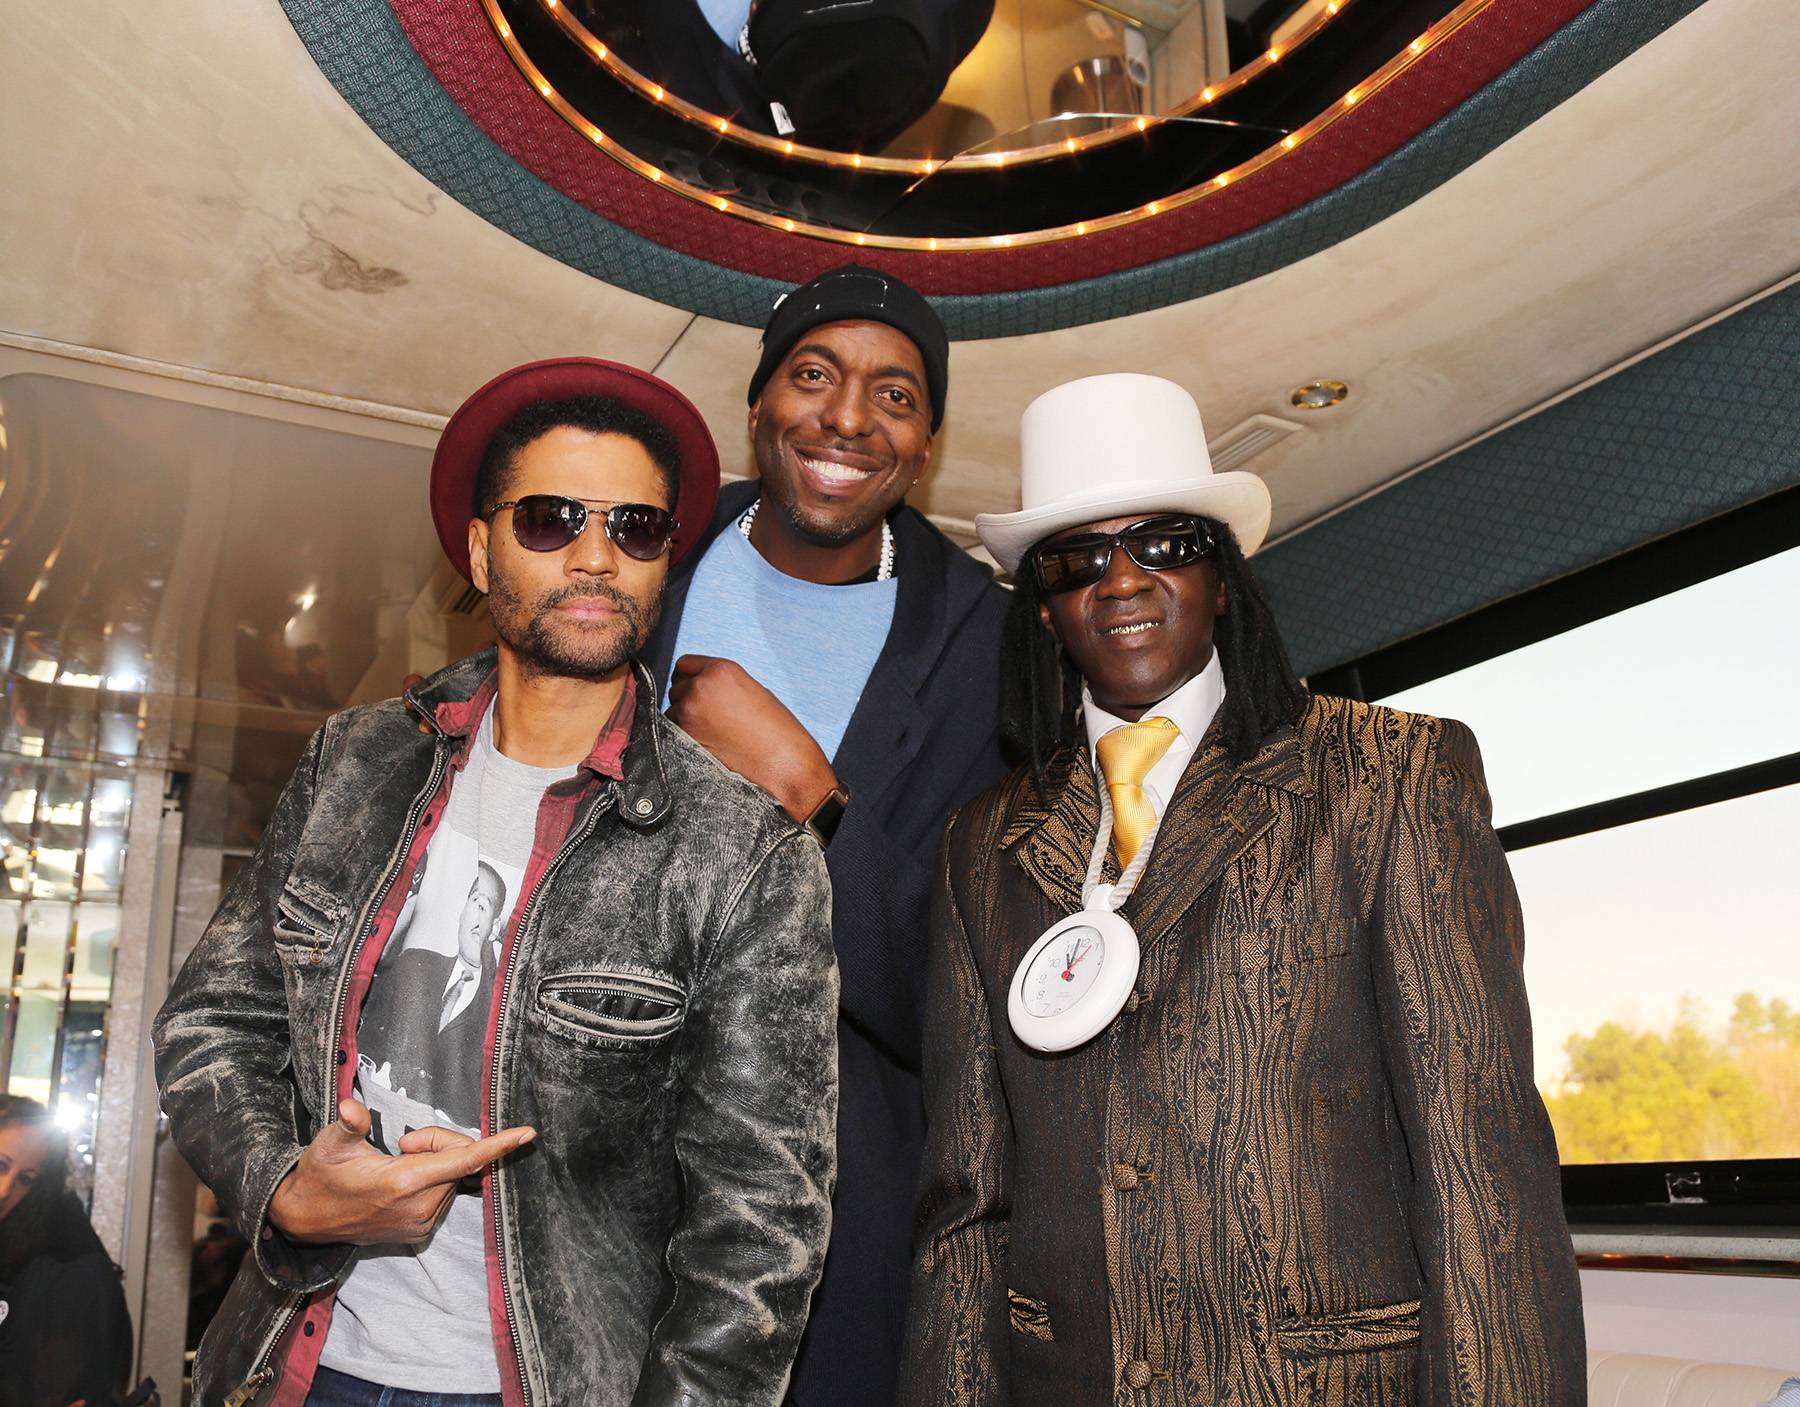 Celebrating the Victory at Selma - Public Enemy's Flavor Flav, former NBA player John Salley and soul singing vet Eric Benet honor the day, joining the Celebrity Bus Ride to Selma.&nbsp;  &nbsp;(Photo: Johnny Nunez/ BET)